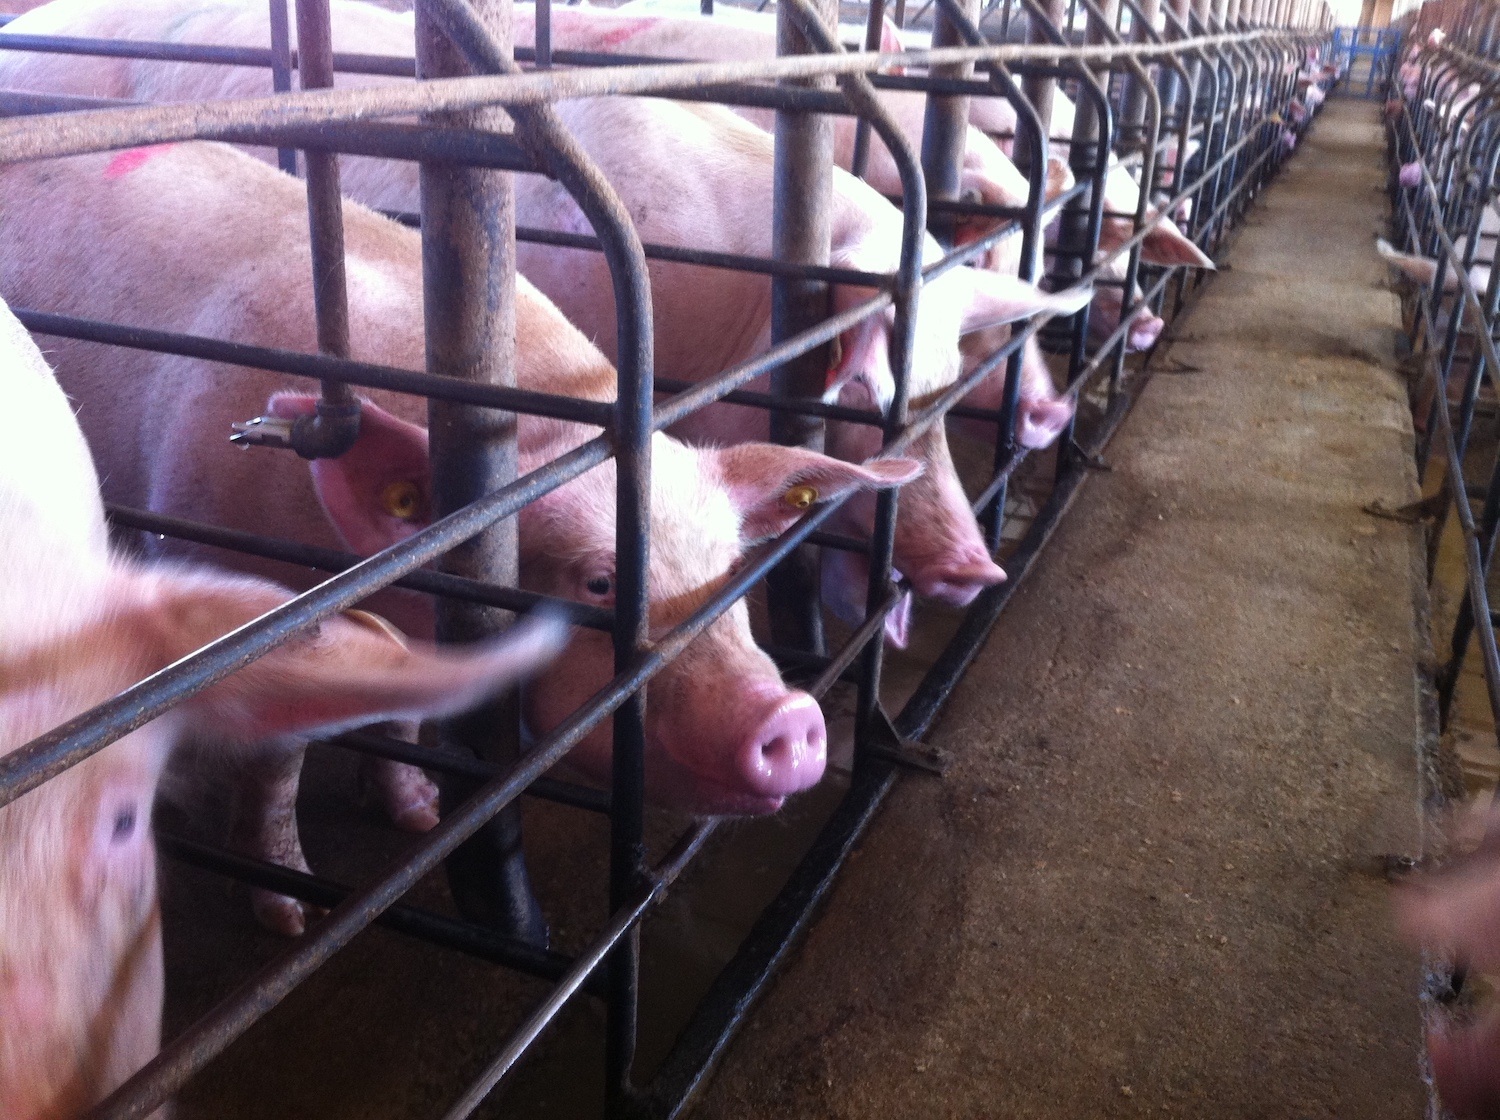 Pigs in gestation crates on farm. March 2022